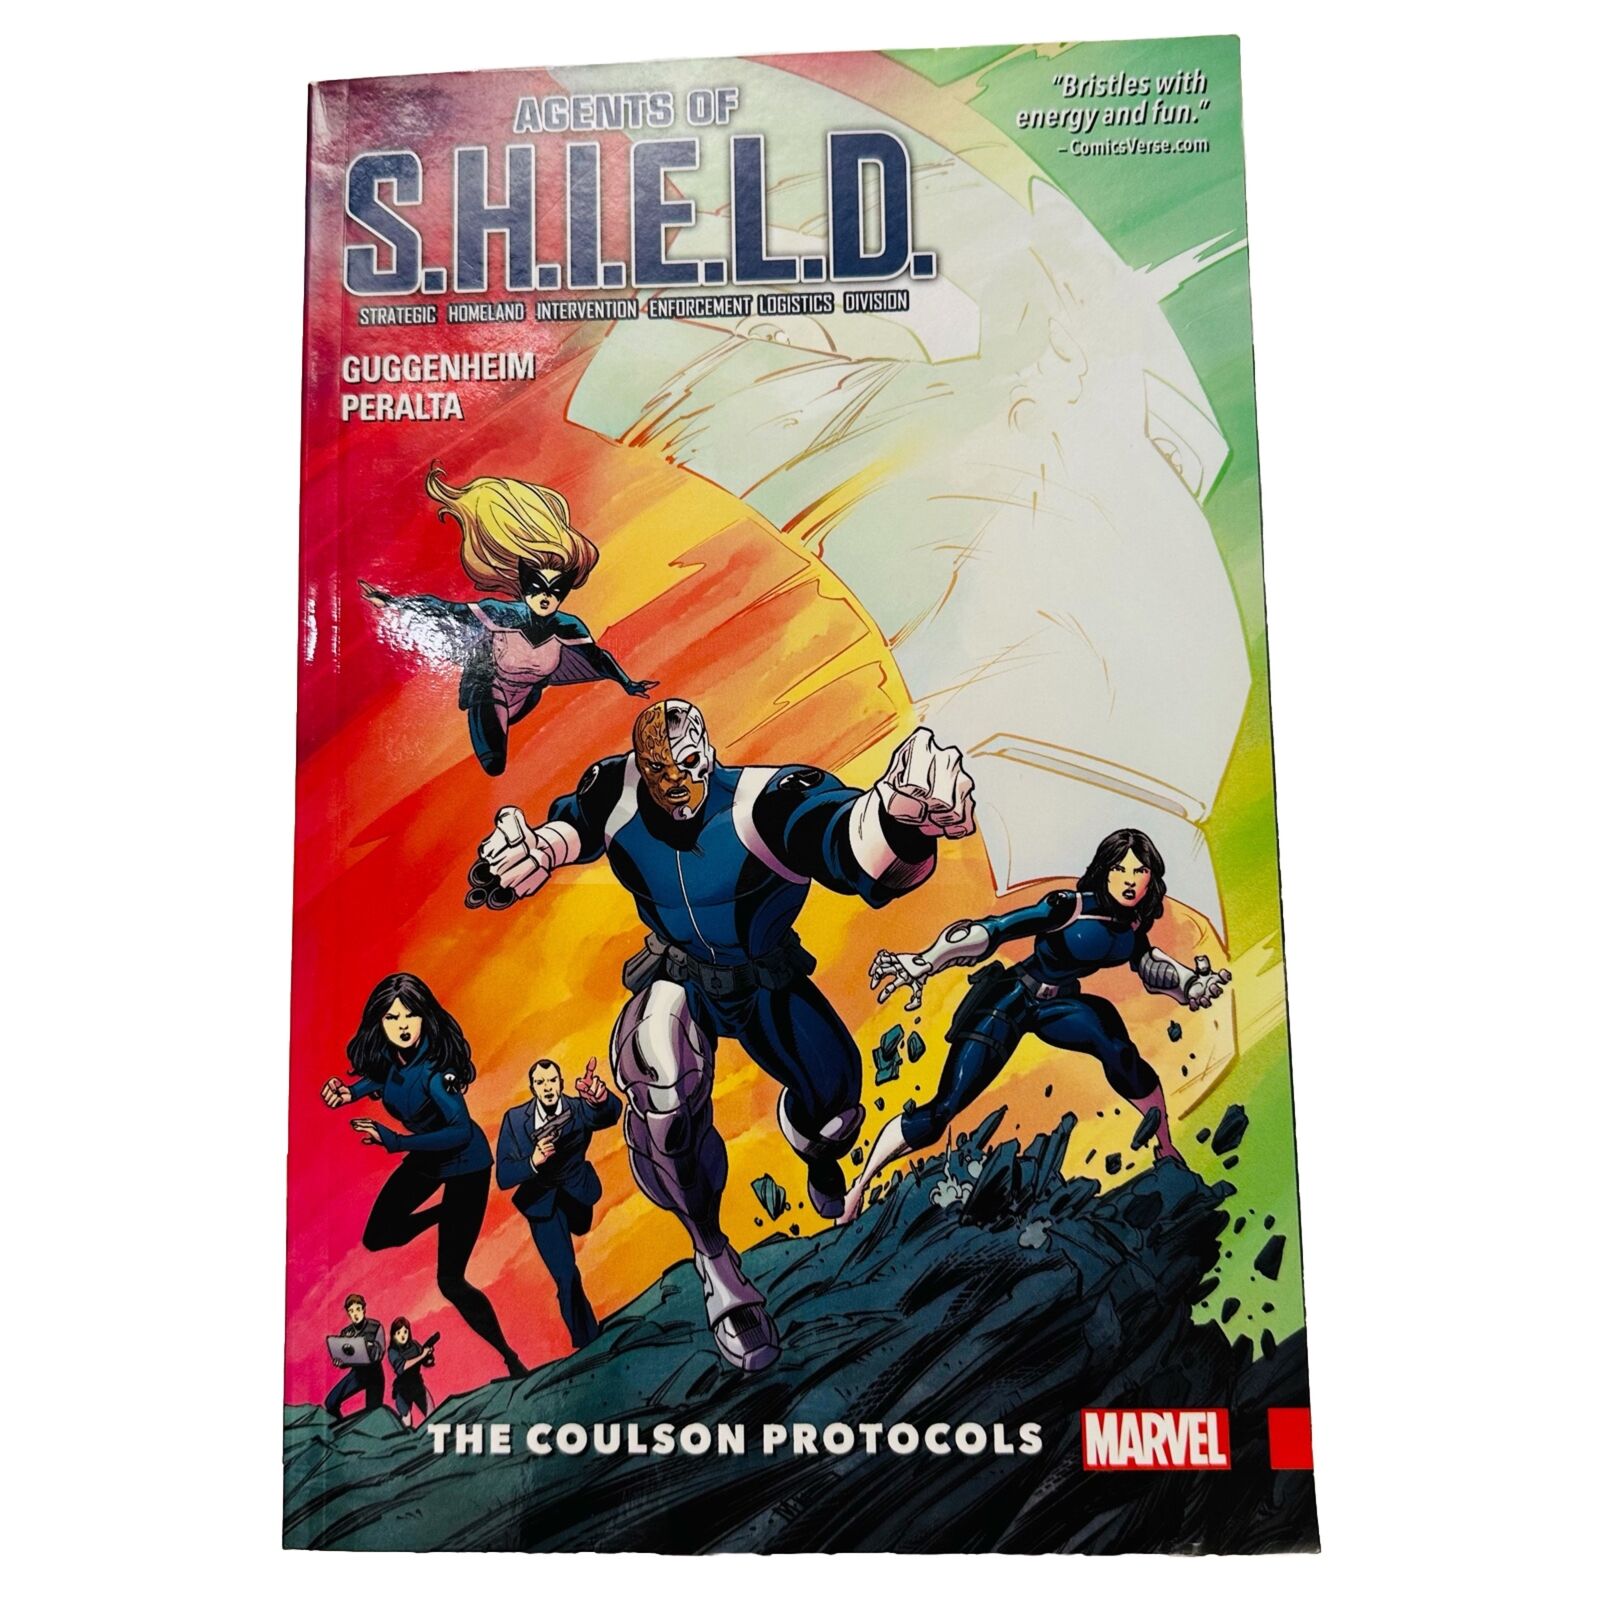 Agents of S.H.I.E.L.D. Vol 1: The Coulson Protocols Marvel 2016 First Printing